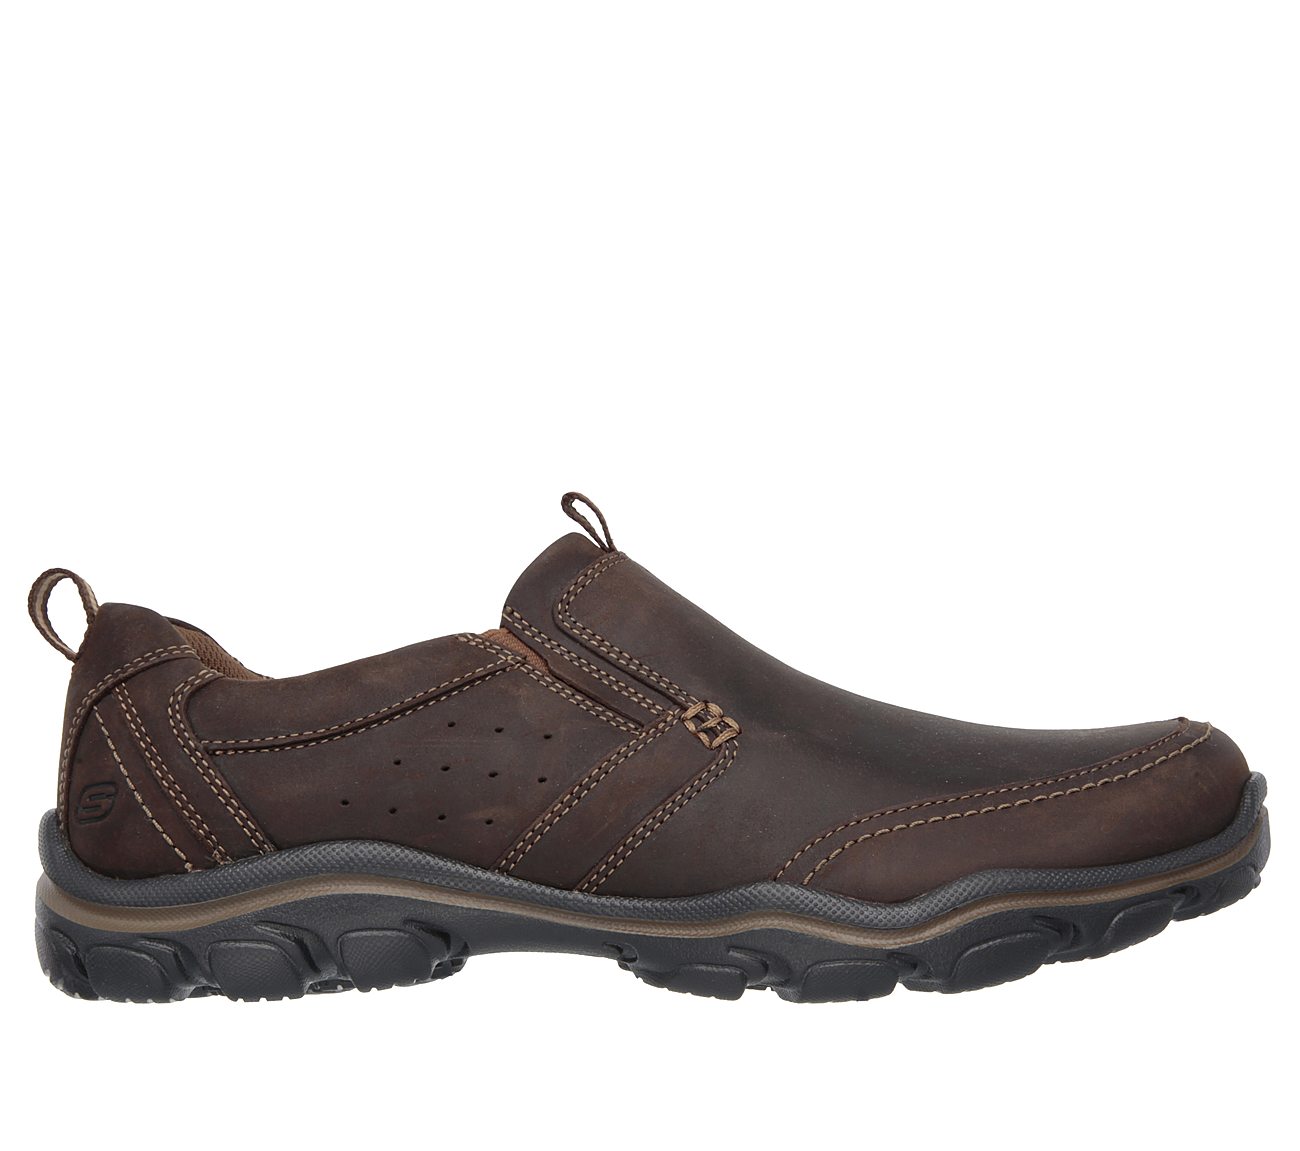 Buy SKECHERS Relaxed Fit: Montz - Devent Modern Comfort Shoes